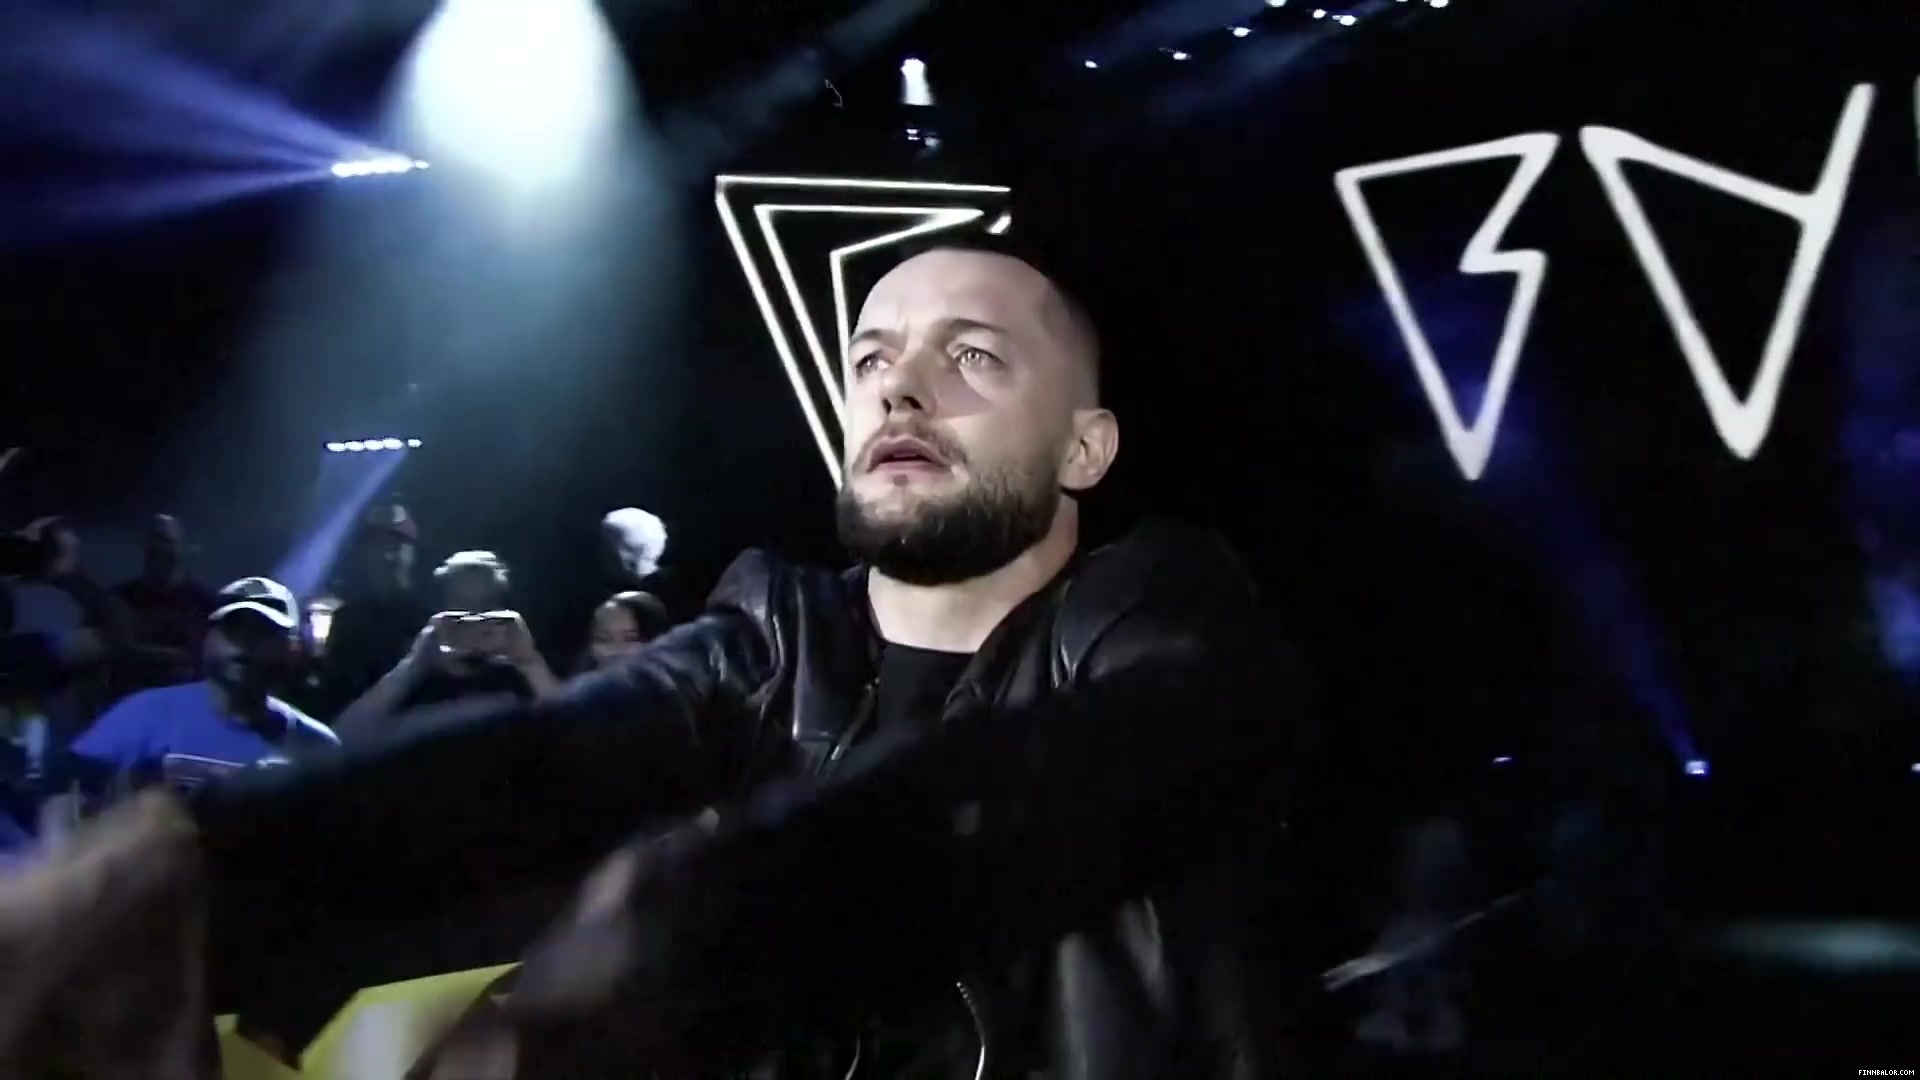 Finn_Balor___The_Rising_of_the_Prince_in_NXT_109.jpg